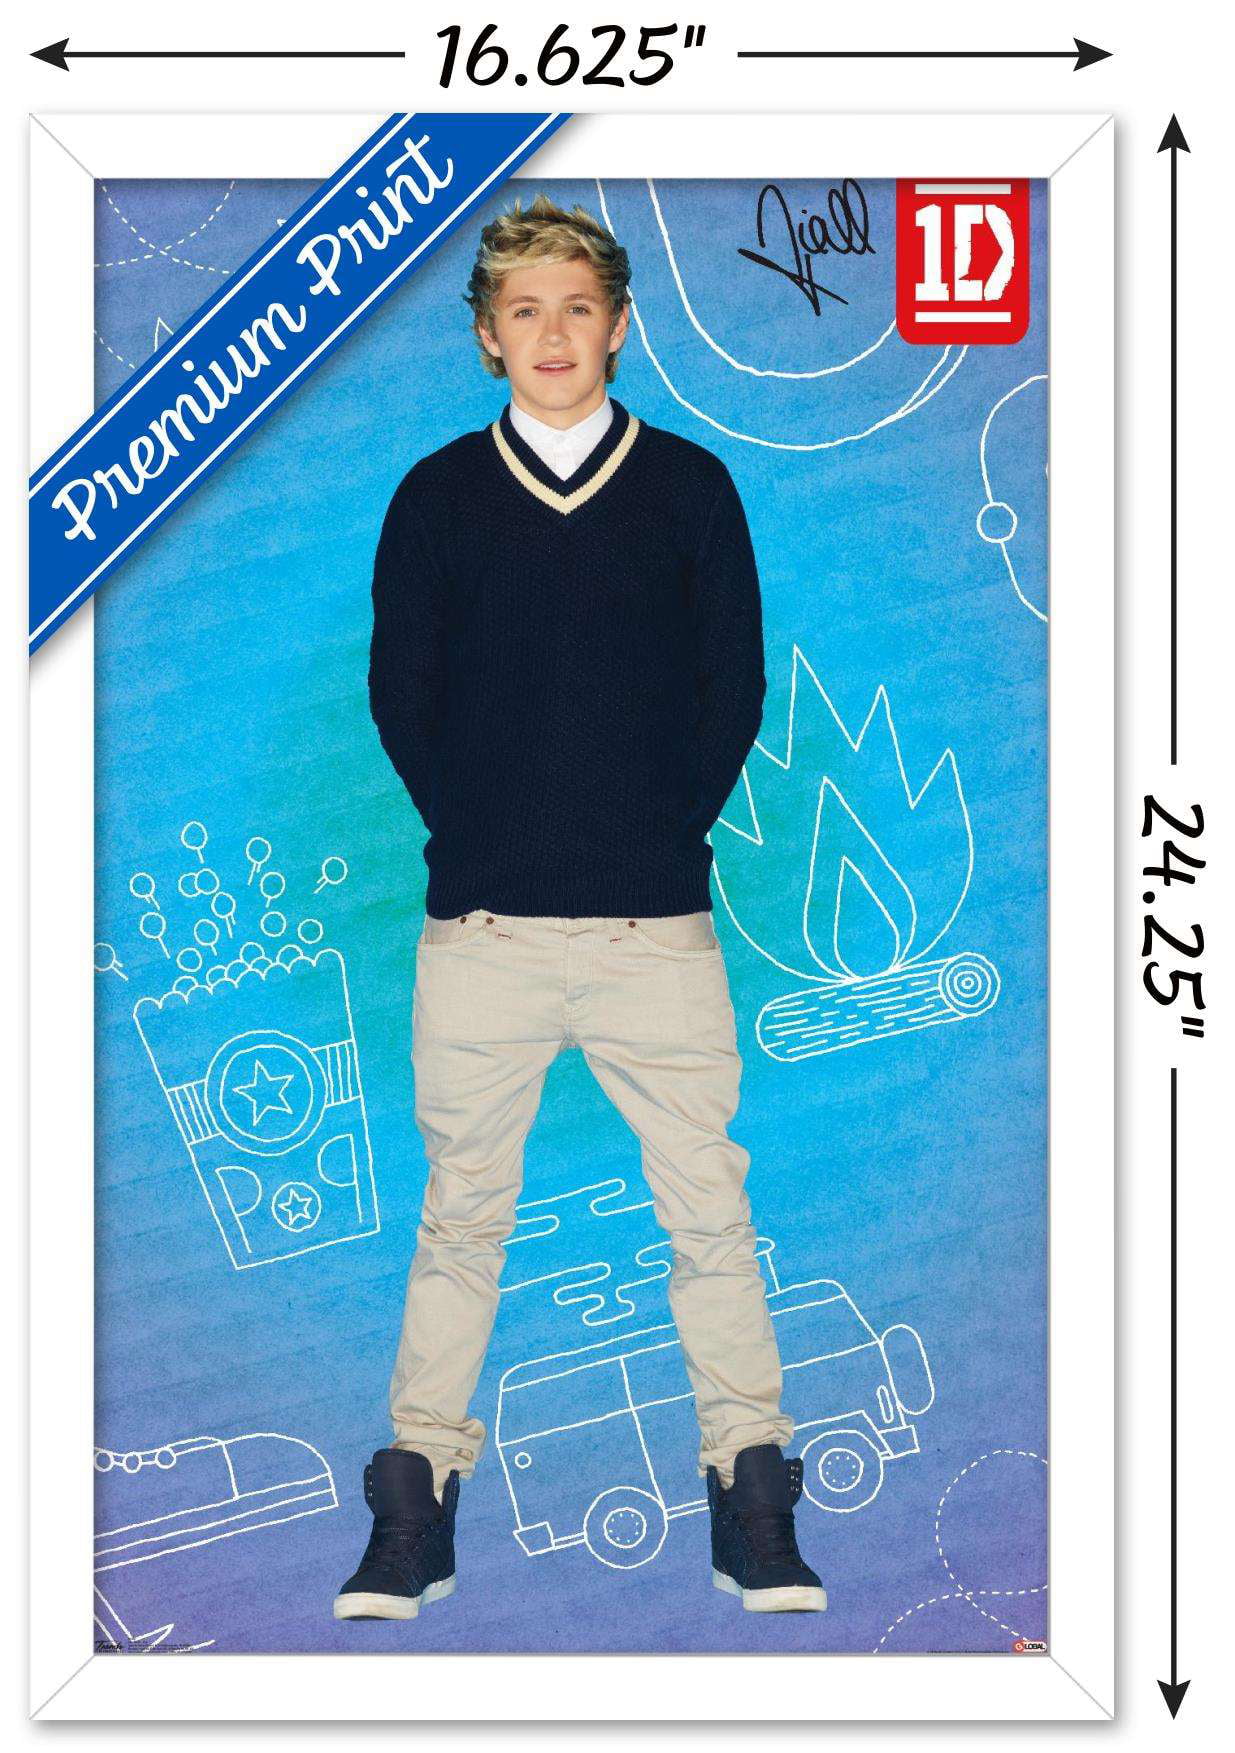 One Direction - Niall Horan - Pop Wall Poster, 14.725